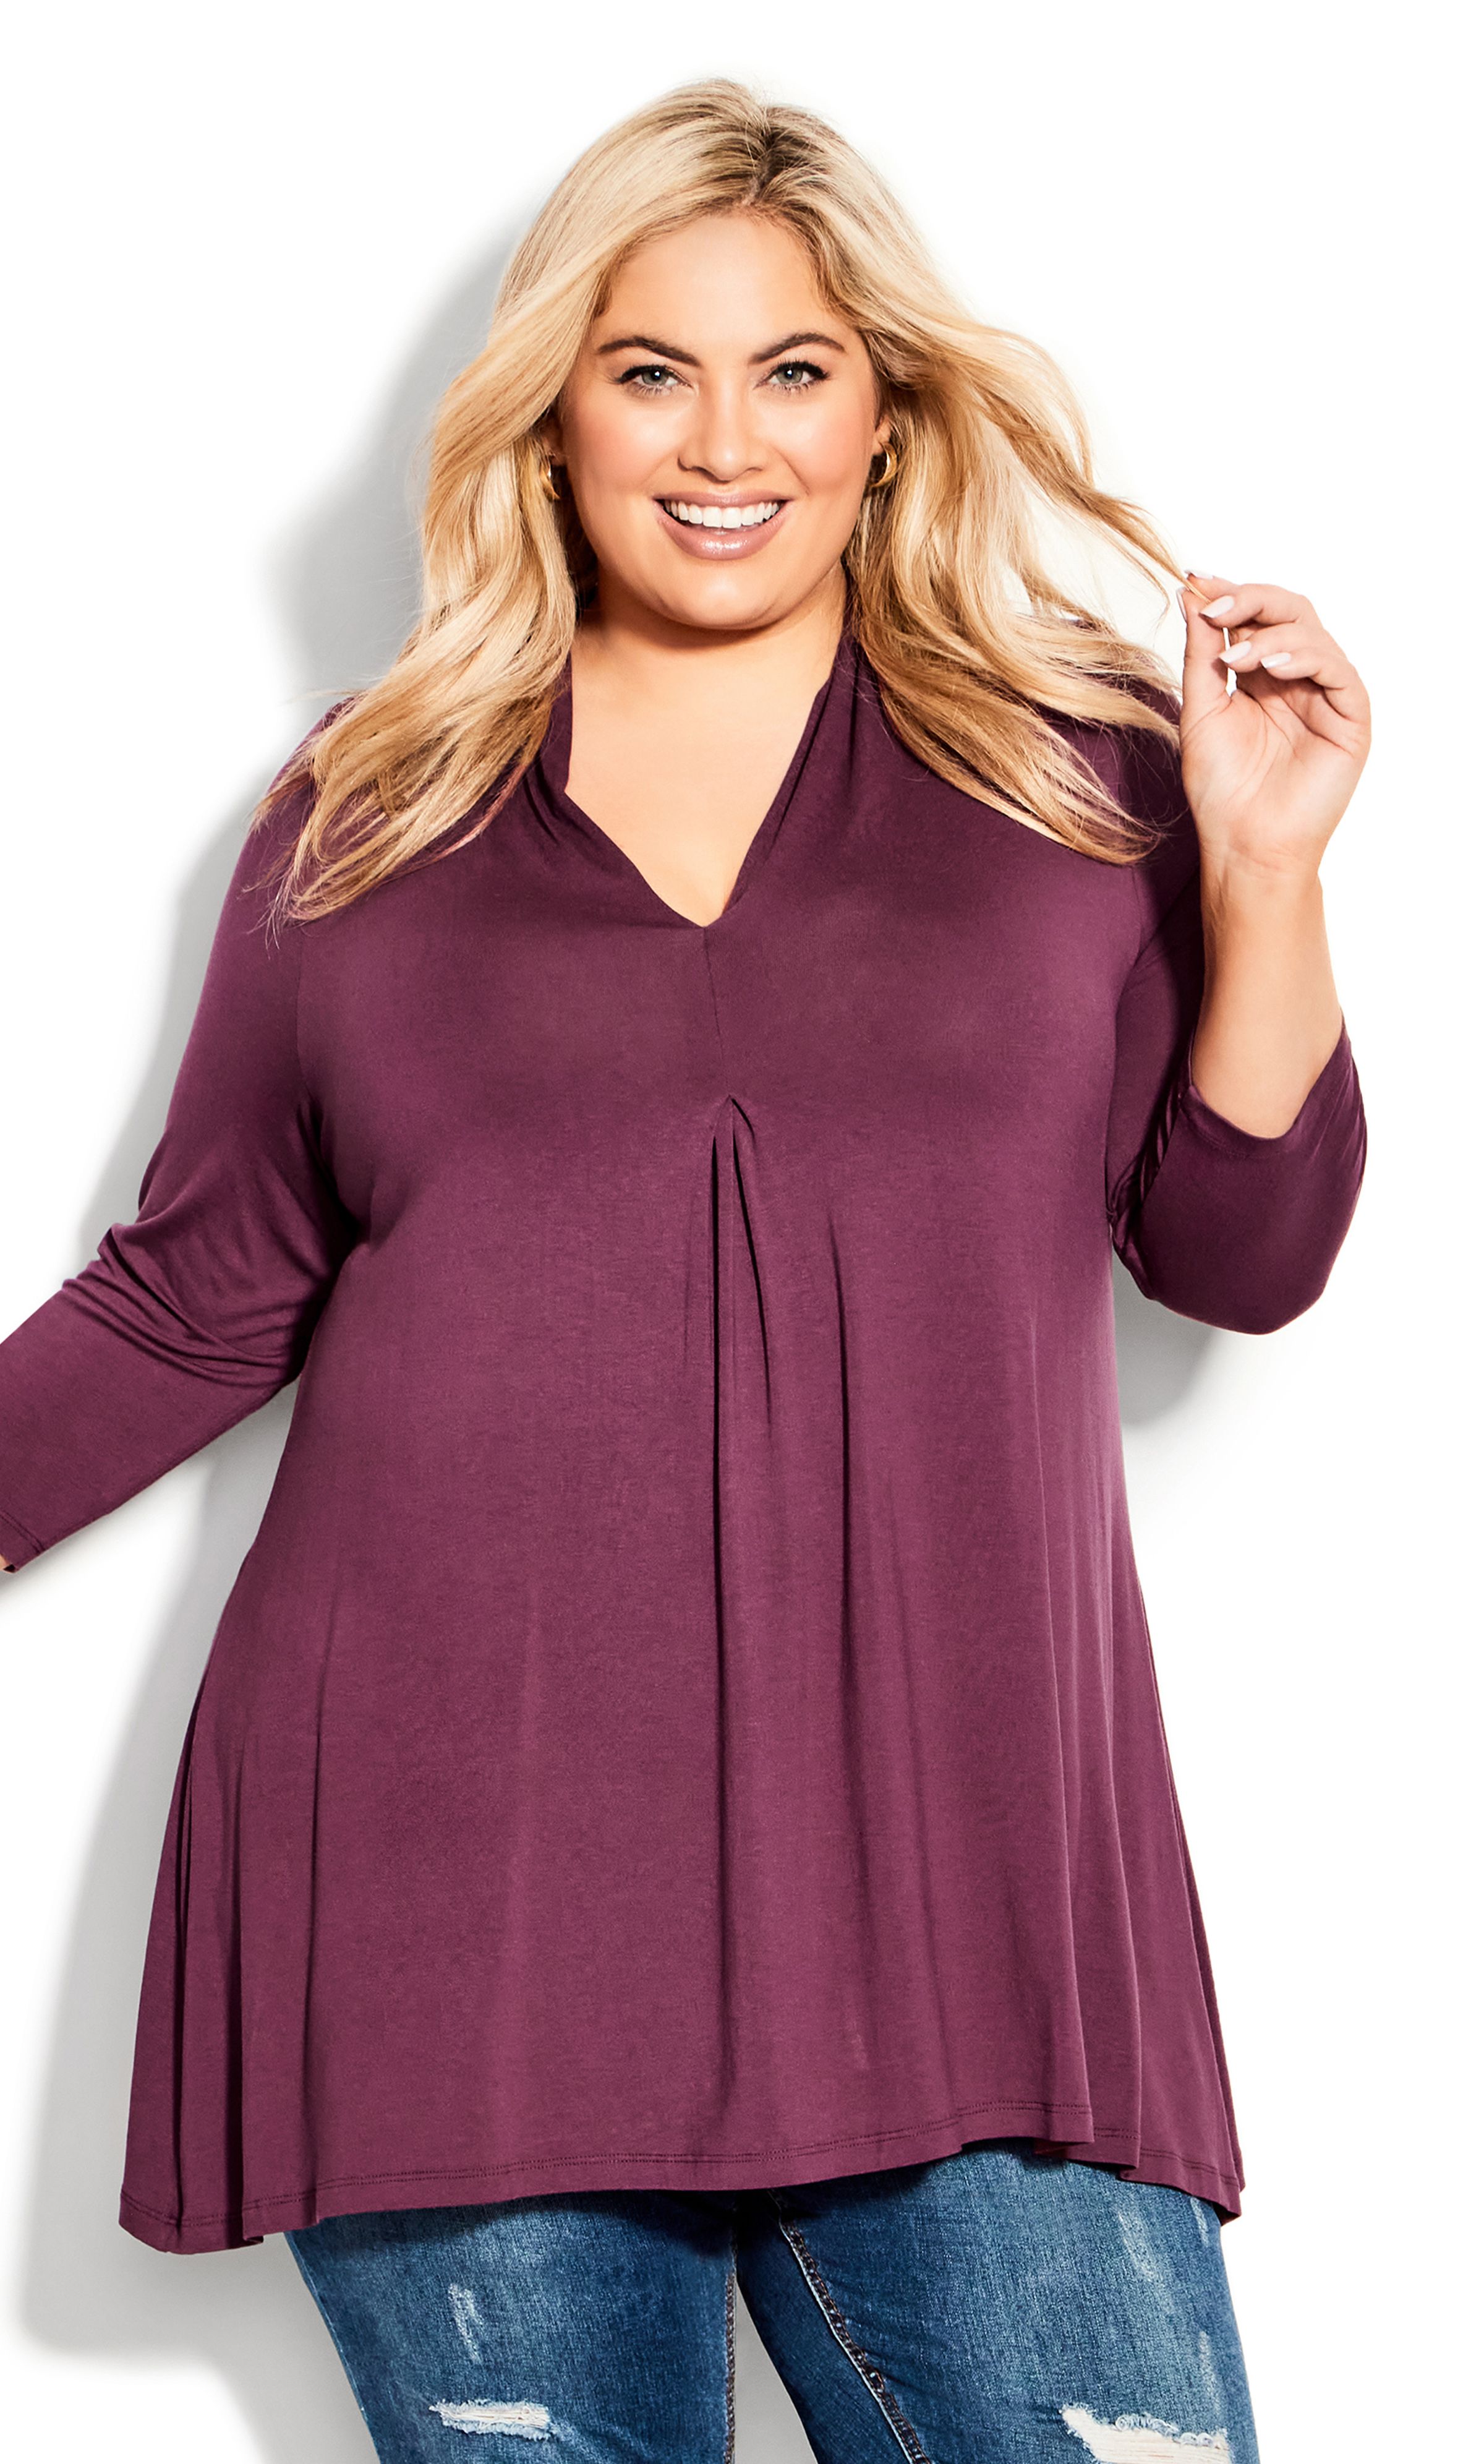 Create the perfect everyday style with the Ellis Plain Tunic. In a dreamy plum shade, this relaxed top shows off your curves in a classic silhouette with a center pleat detail. Key Features Include: - V-neckline - 3/4 length sleeves - Pull-over style - Darted bust for shape - Center pleat detail - Relaxed fit - Soft stretch fabrication - Below hip length hemline Layer up with a denim jacket and a pair of leggings.